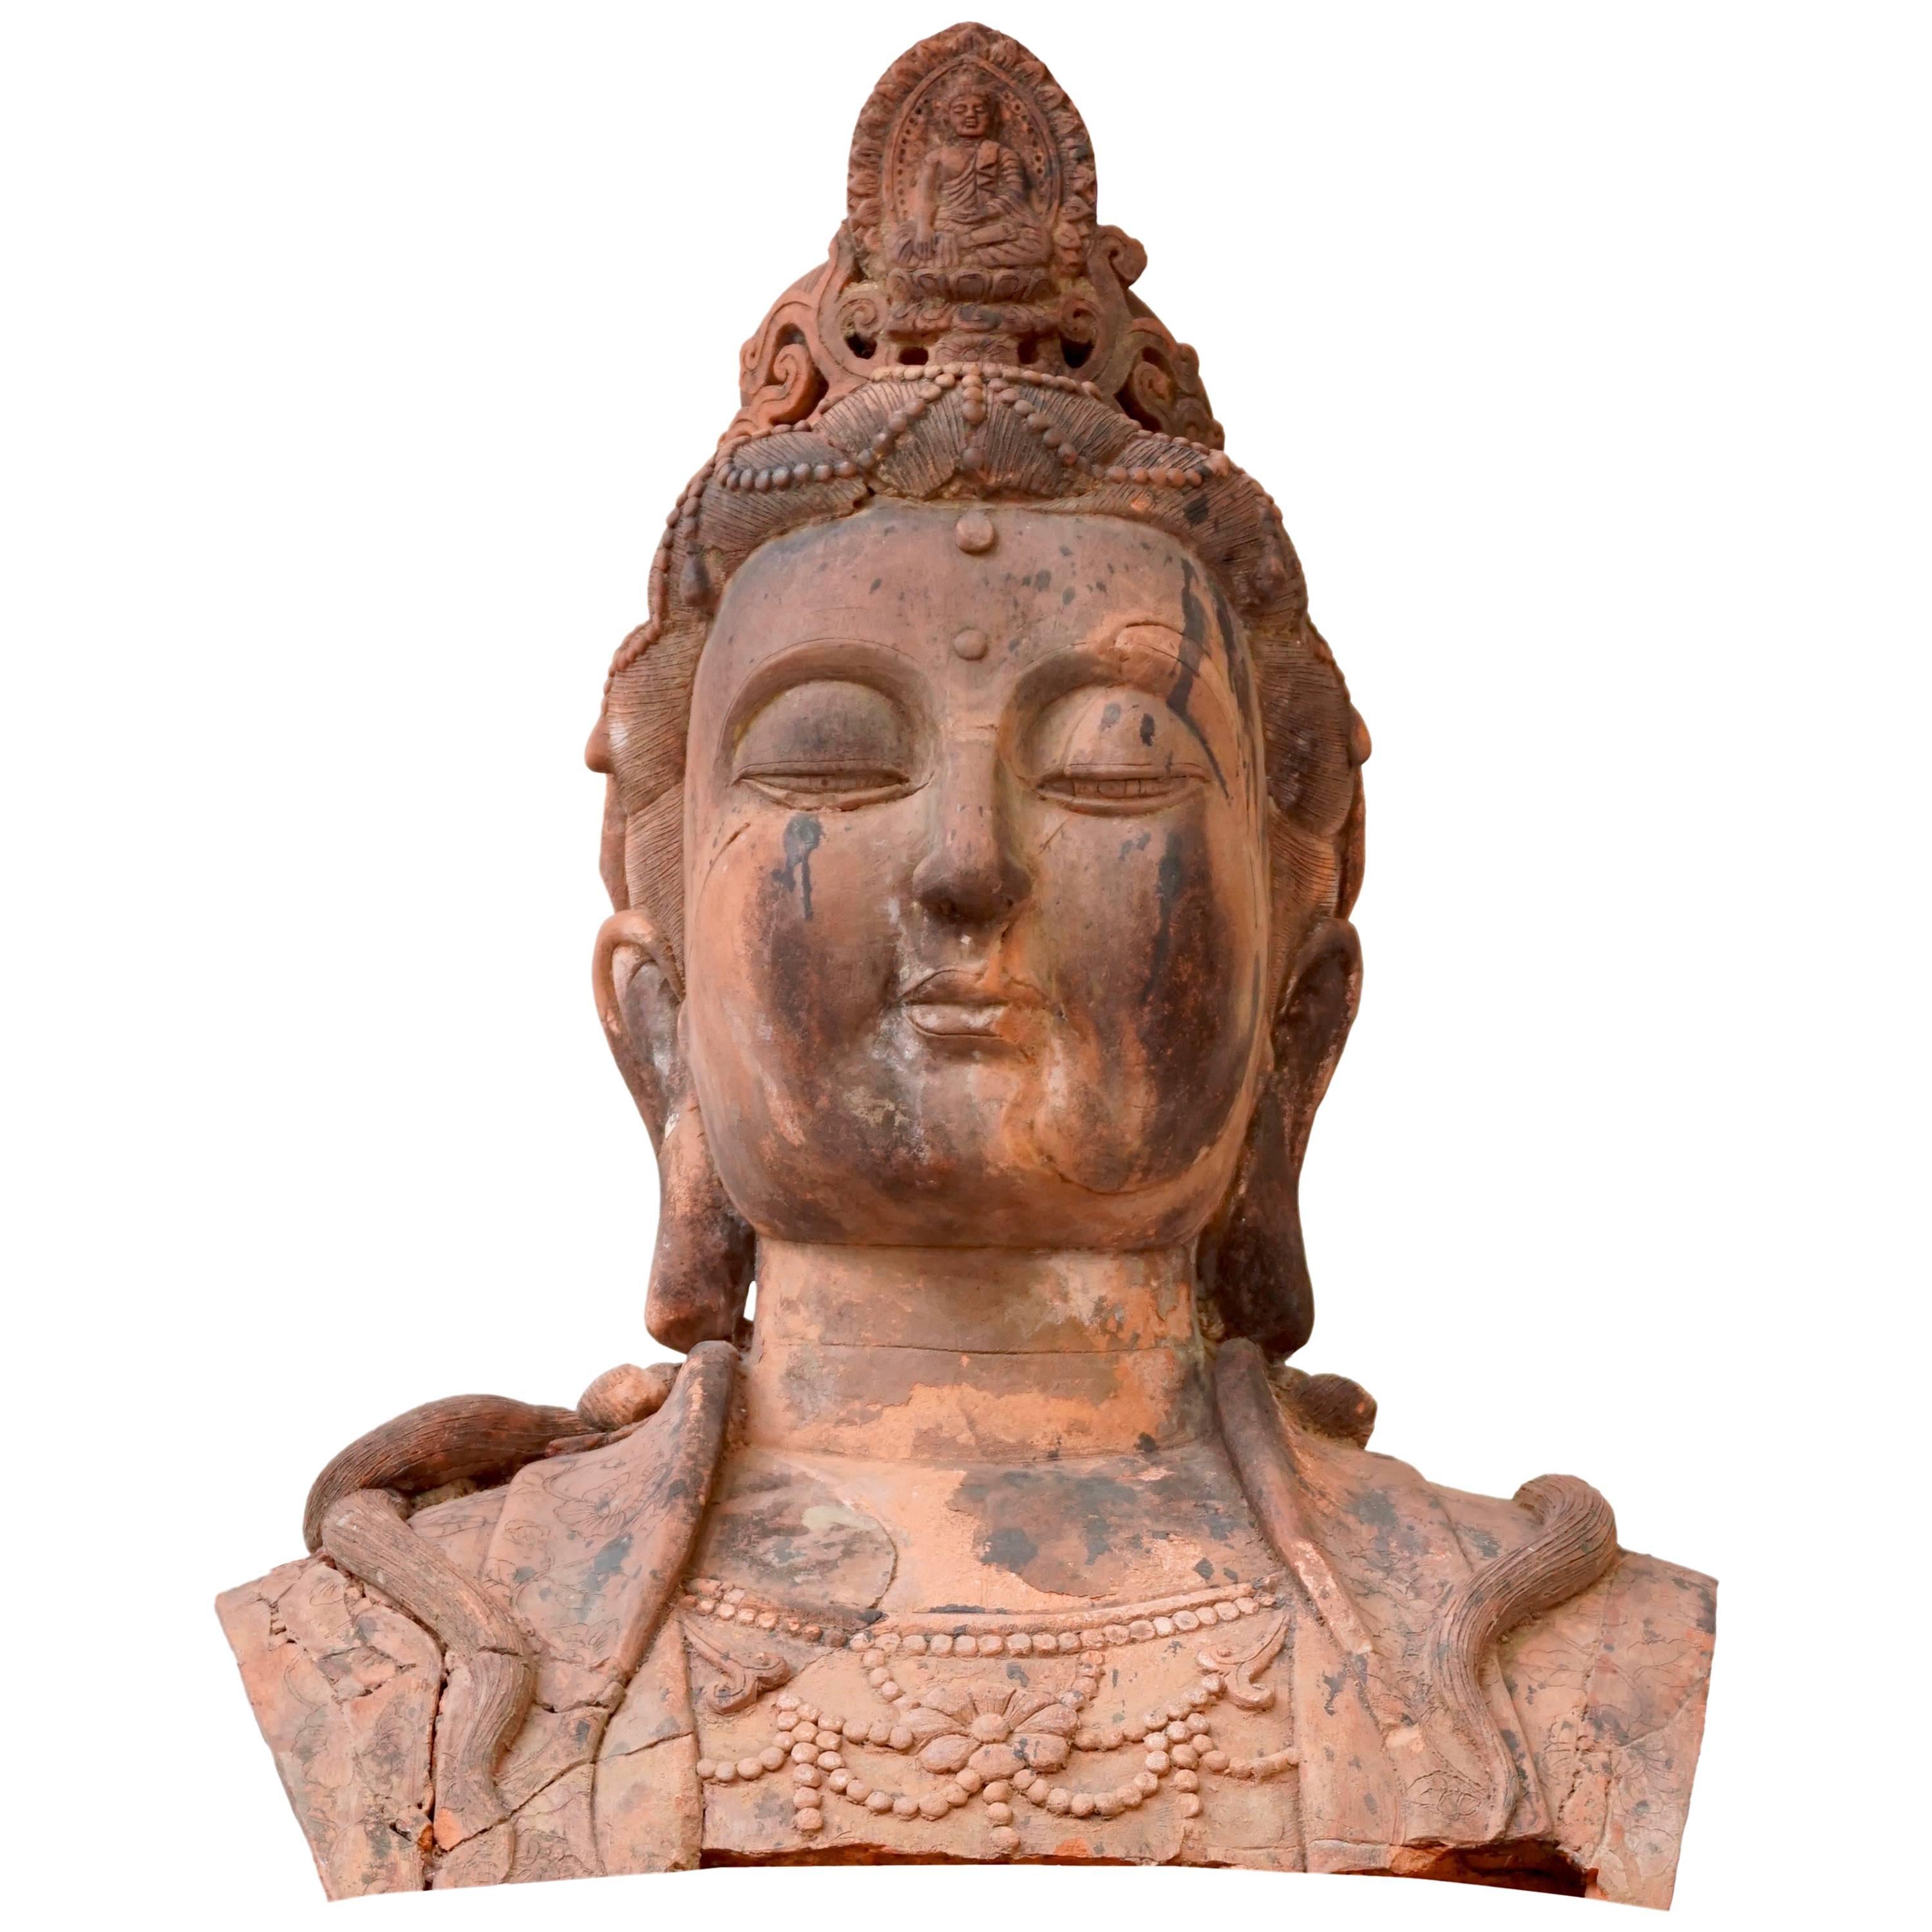 Larger Than Life Terracotta Buddha Bust of Guanyin, Early 20th Century, China